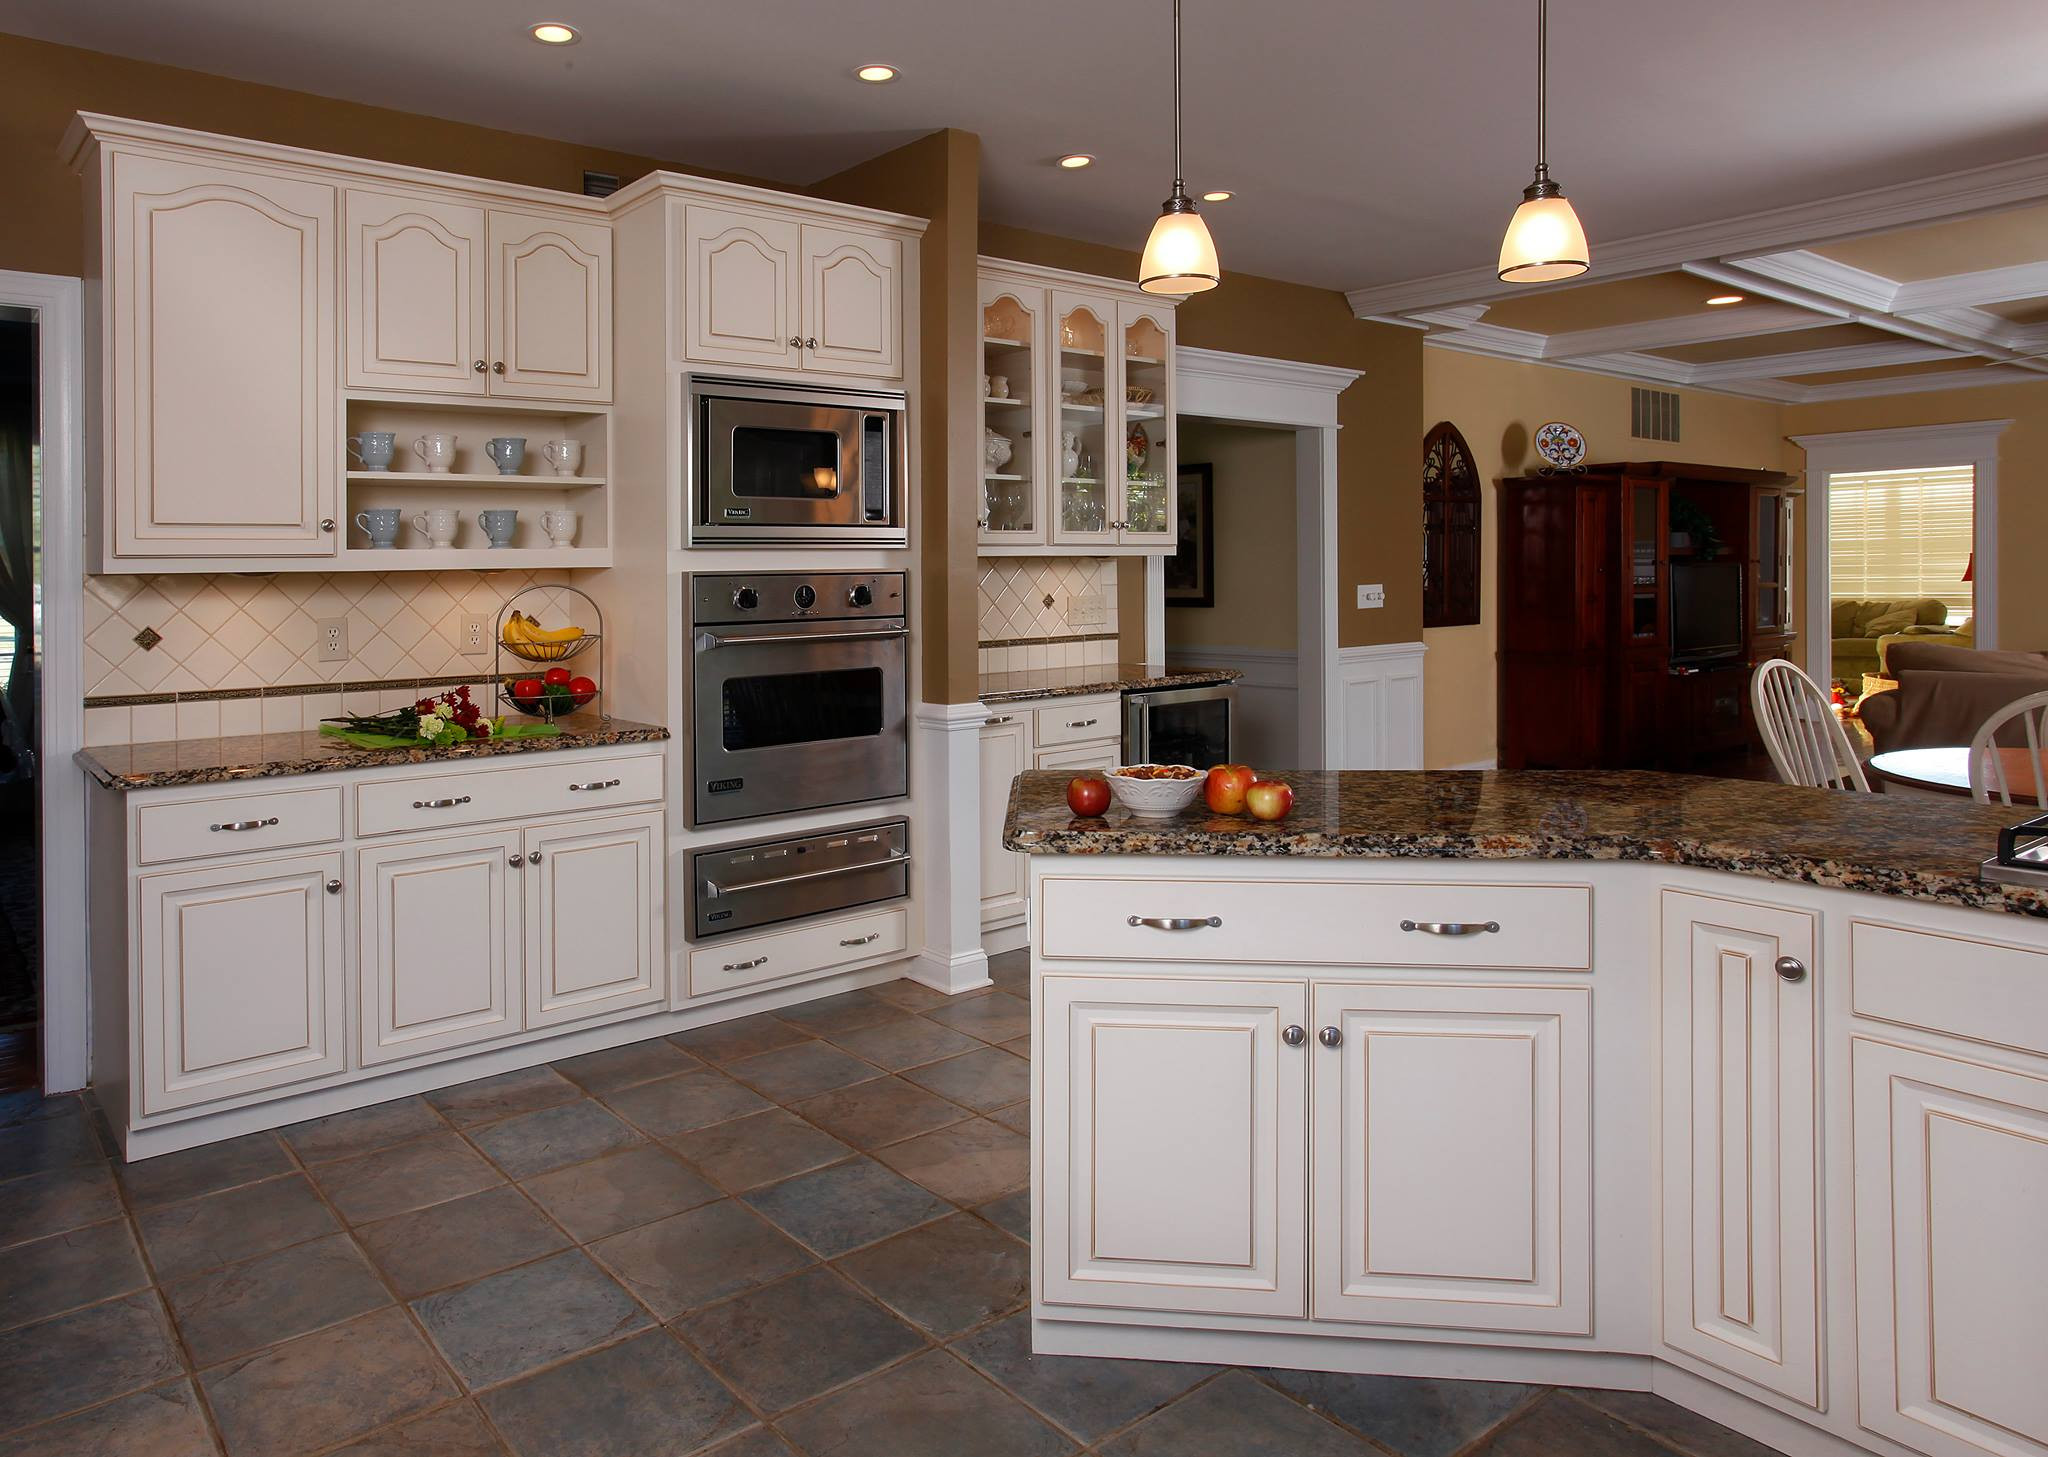 Images Of White Kitchen Cabinets
 Why Winter White Cabinets are so Popular